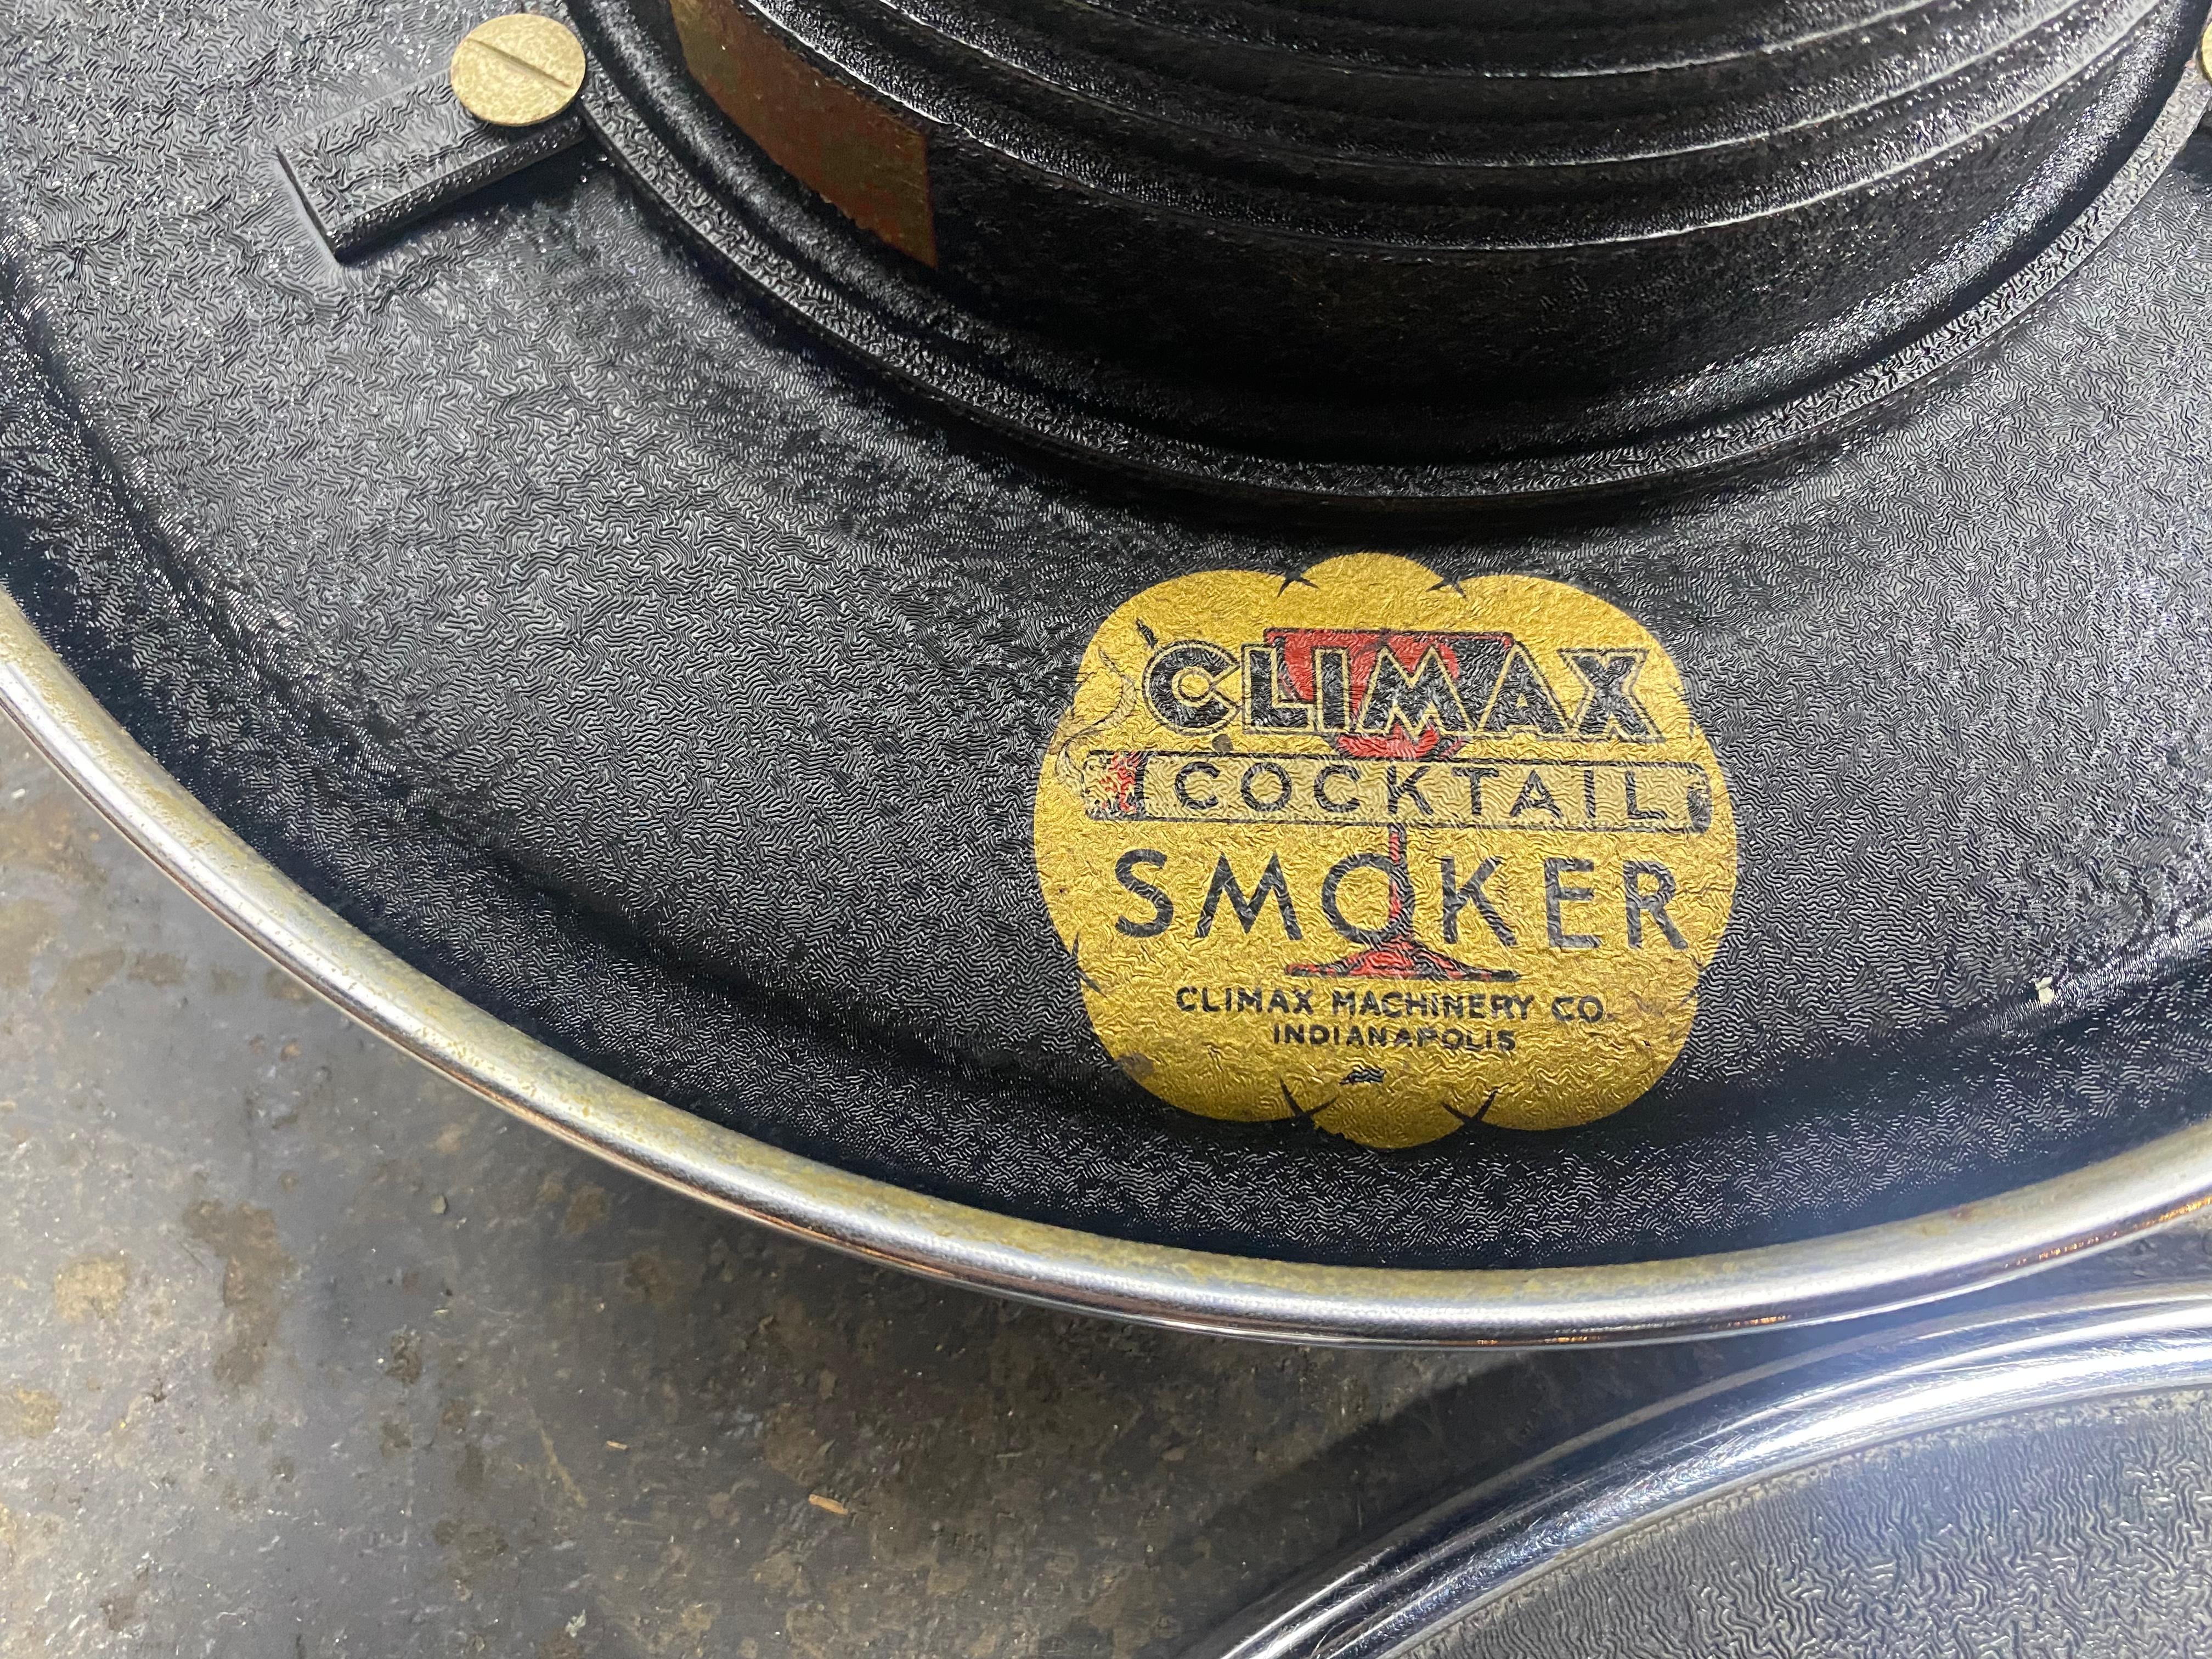 W.J. Campbell designed this art deco cocktail smoker in 1934 for the Climax Machinery Company of Indianapolis. The smoke stand and ashtray feature a circular ring which doubles as a tray and can be removed to serve drinks. The ashtray has a lifting